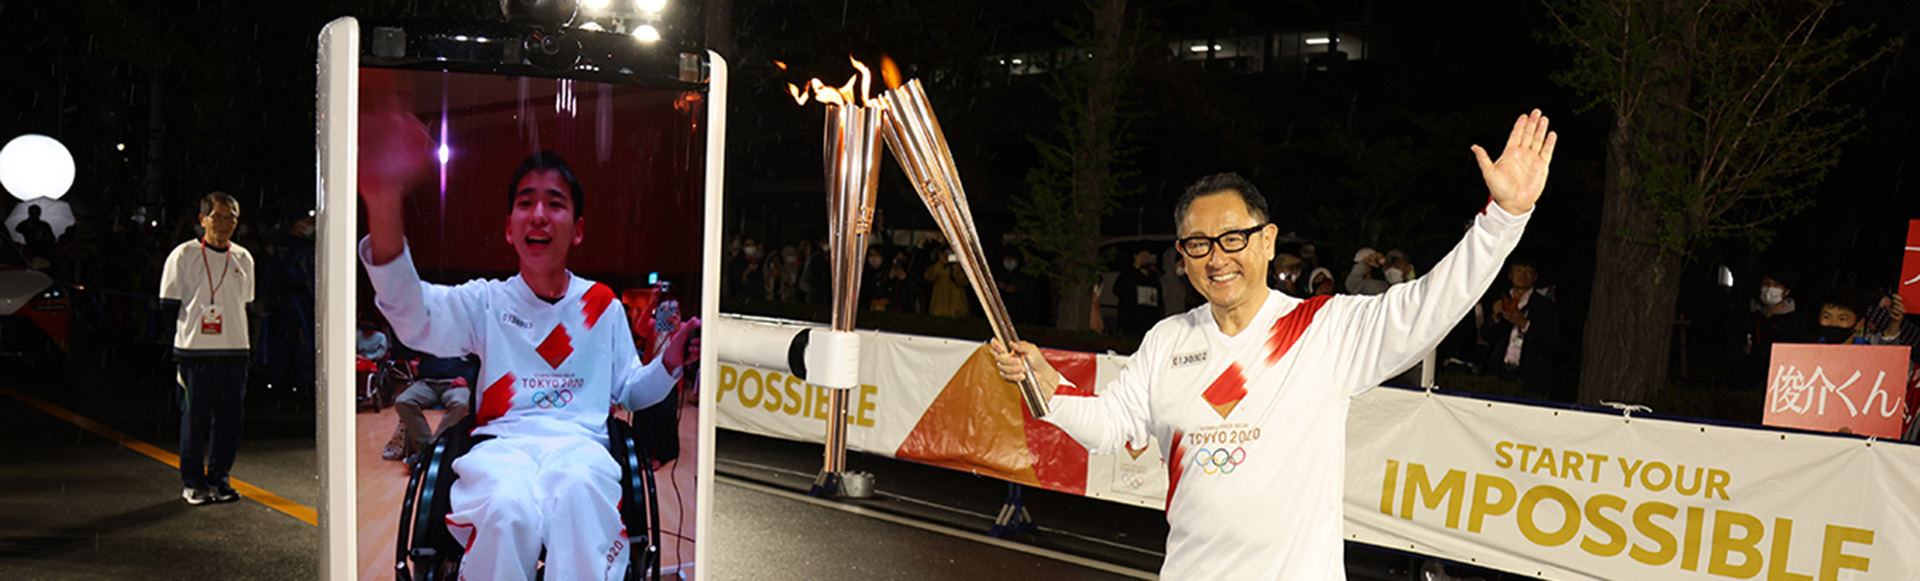 President Akio Toyoda's Comment on Tokyo 2020 Olympic Torch Relay (after fulfilling his role as a torchbearer on April 6)